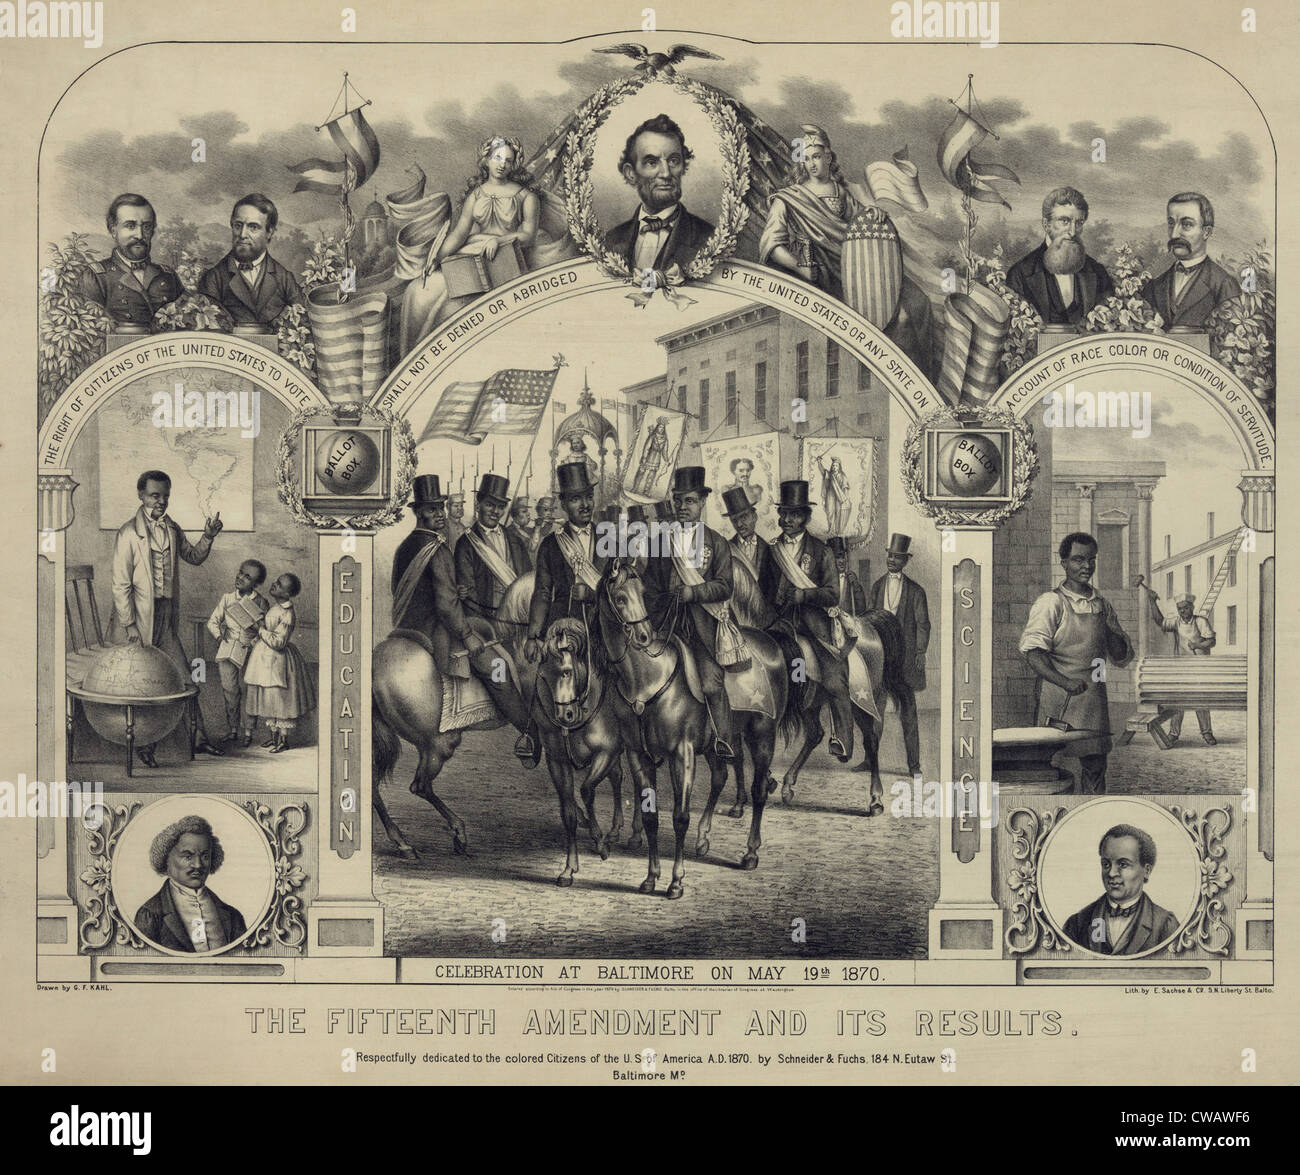 The Fifteenth Amendment banning voting discrimination was celebrated in this 1870 print. Central panel shows African American Stock Photo